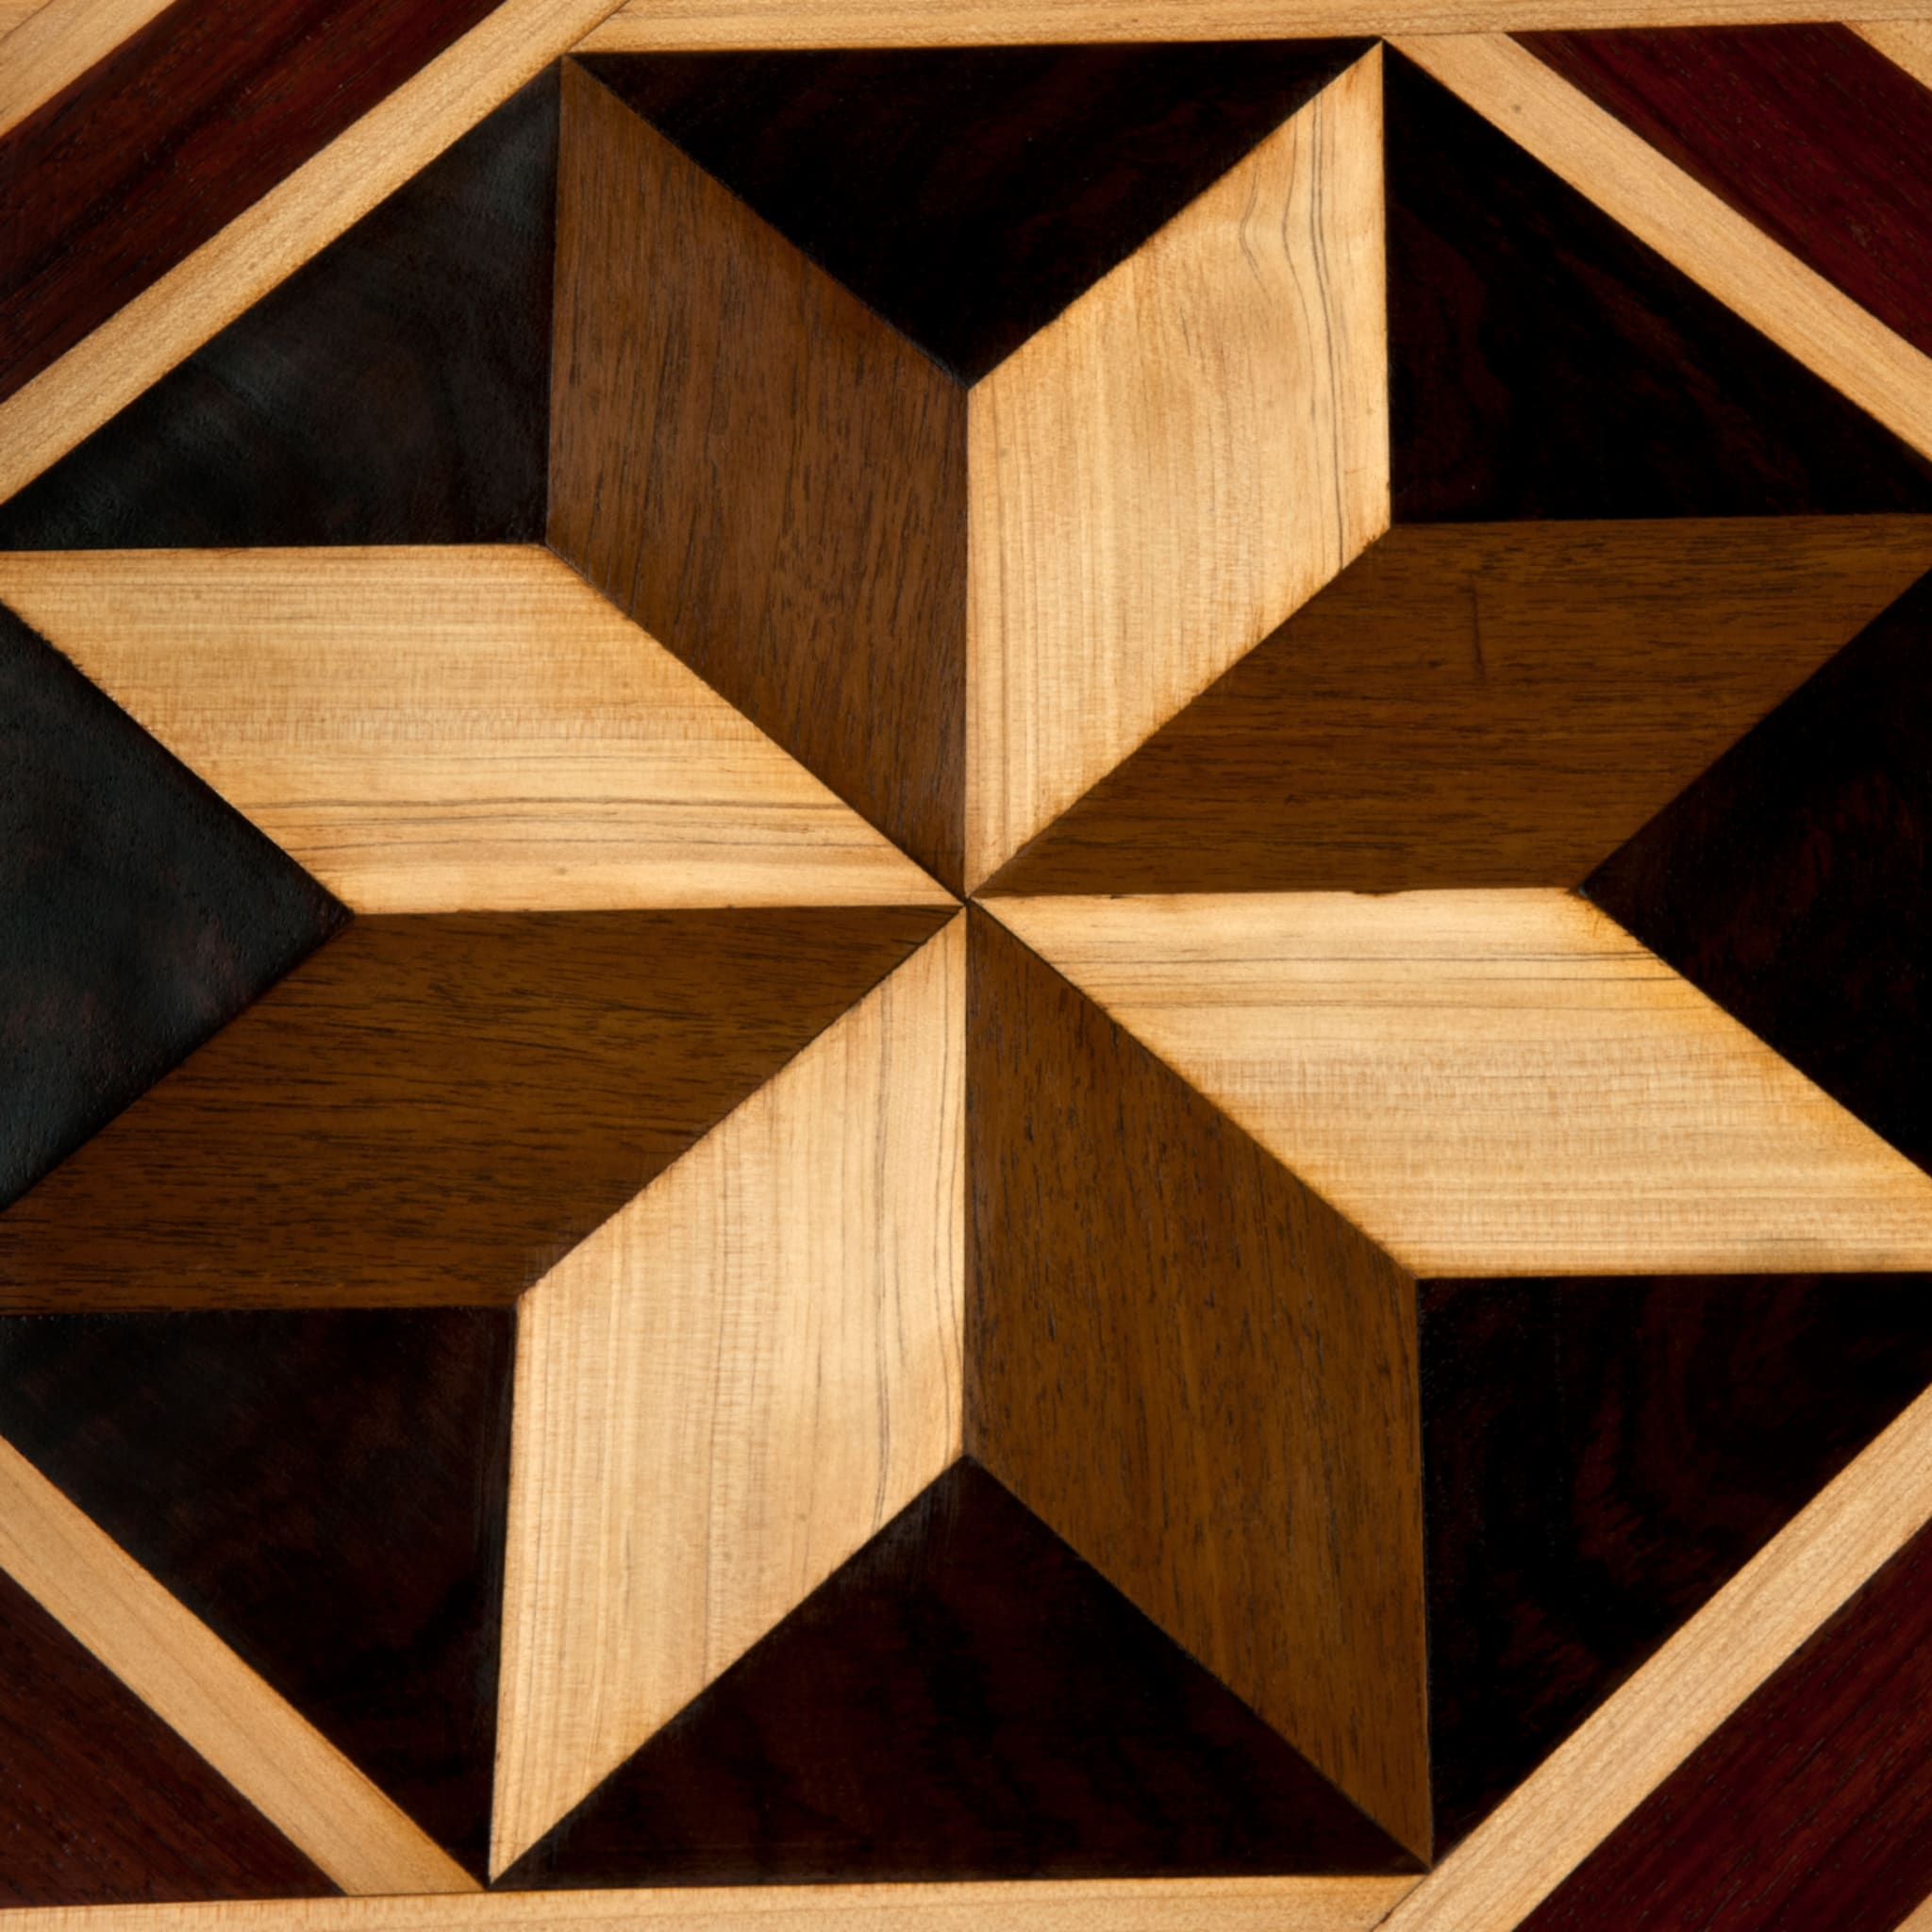 Renaissance-Style Marquetry Wheeled Coffee Table #2 - Alternative view 3